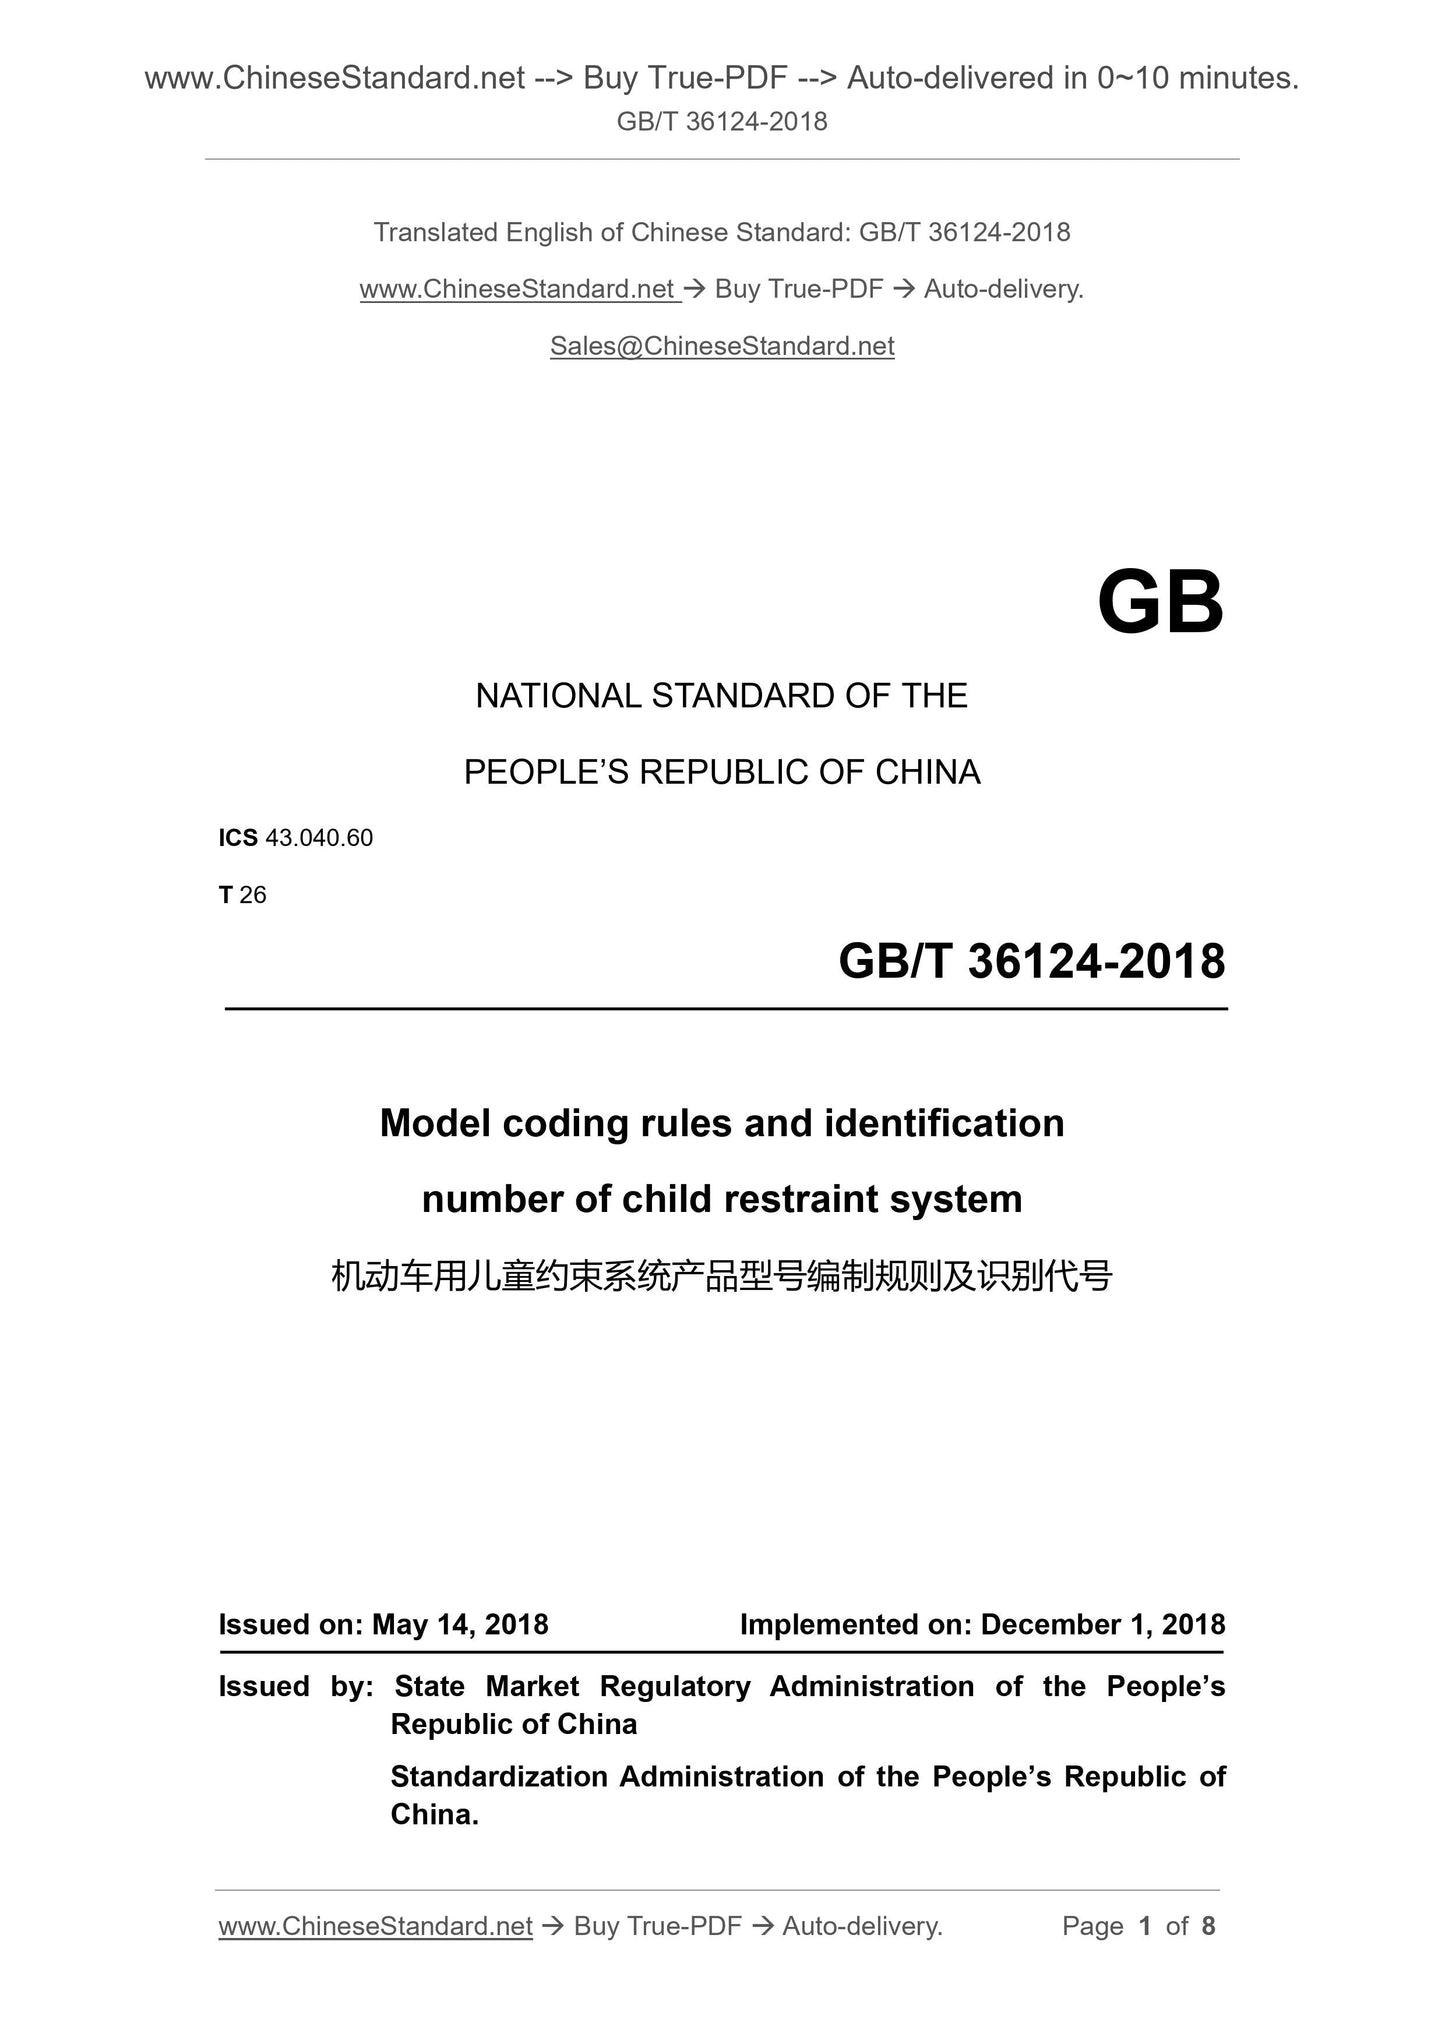 GB/T 36124-2018 Page 1